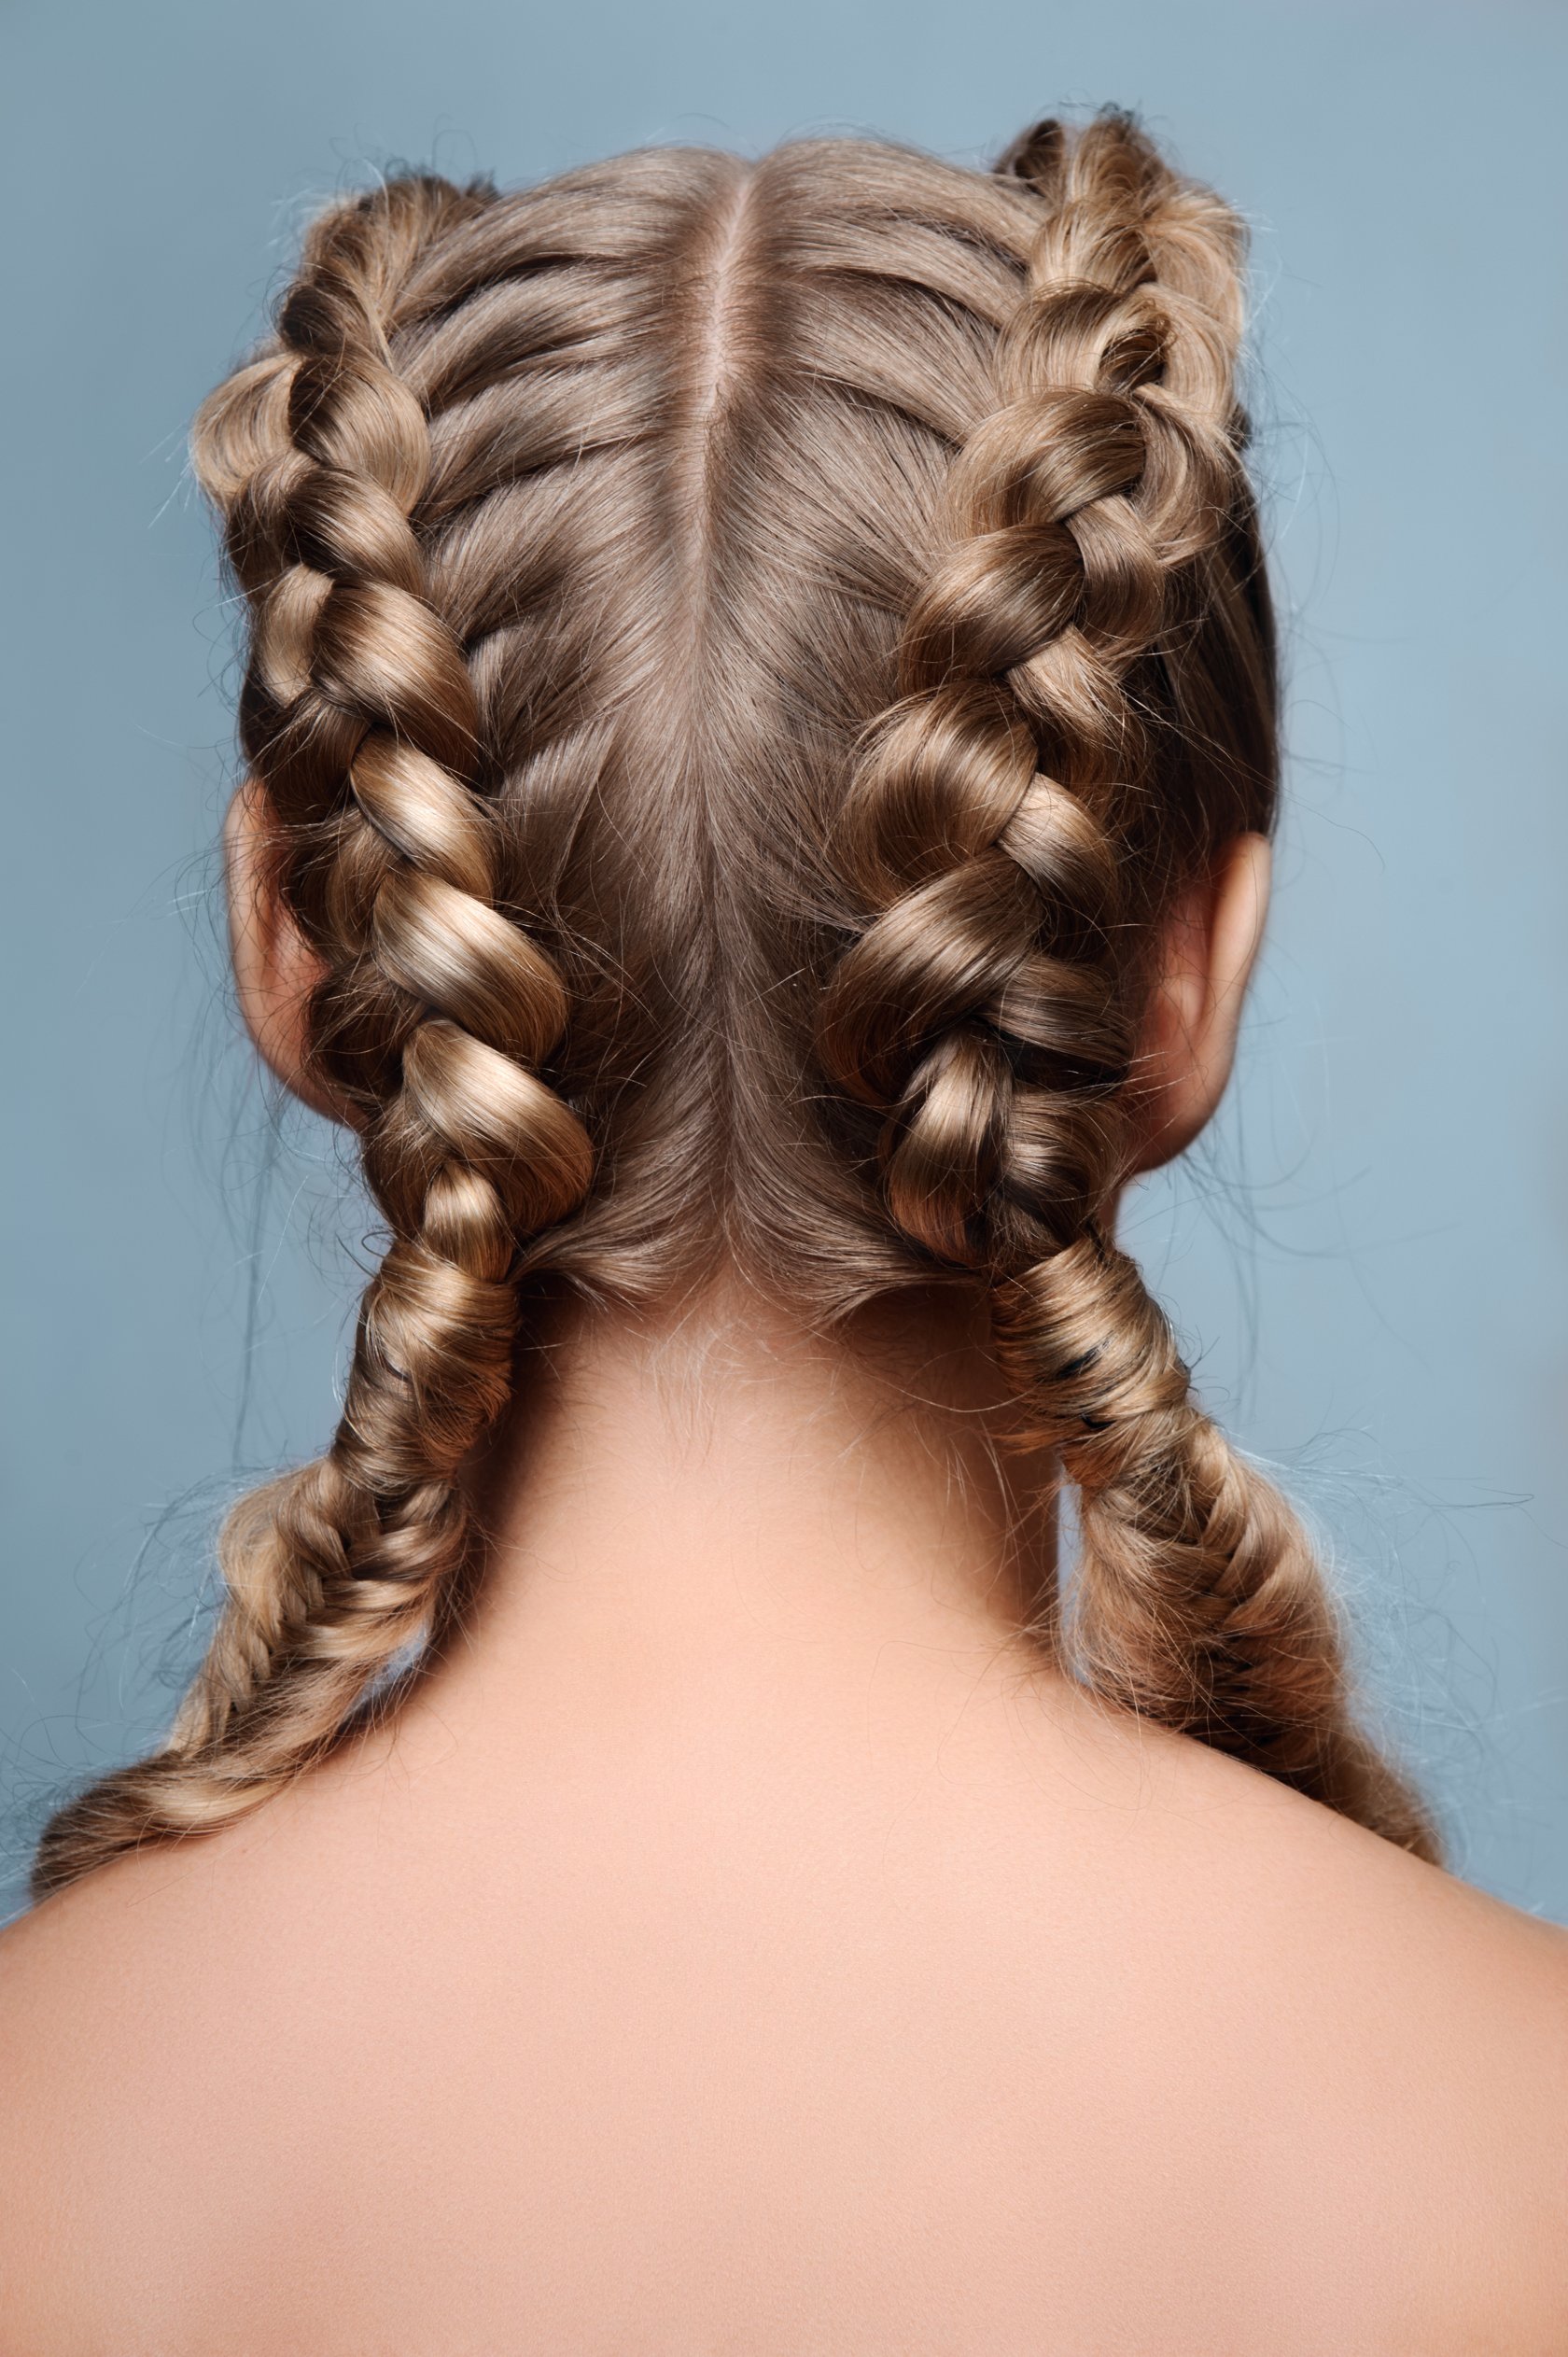 10 Party Hairstyles For The Ultimate Night Out | John Frieda